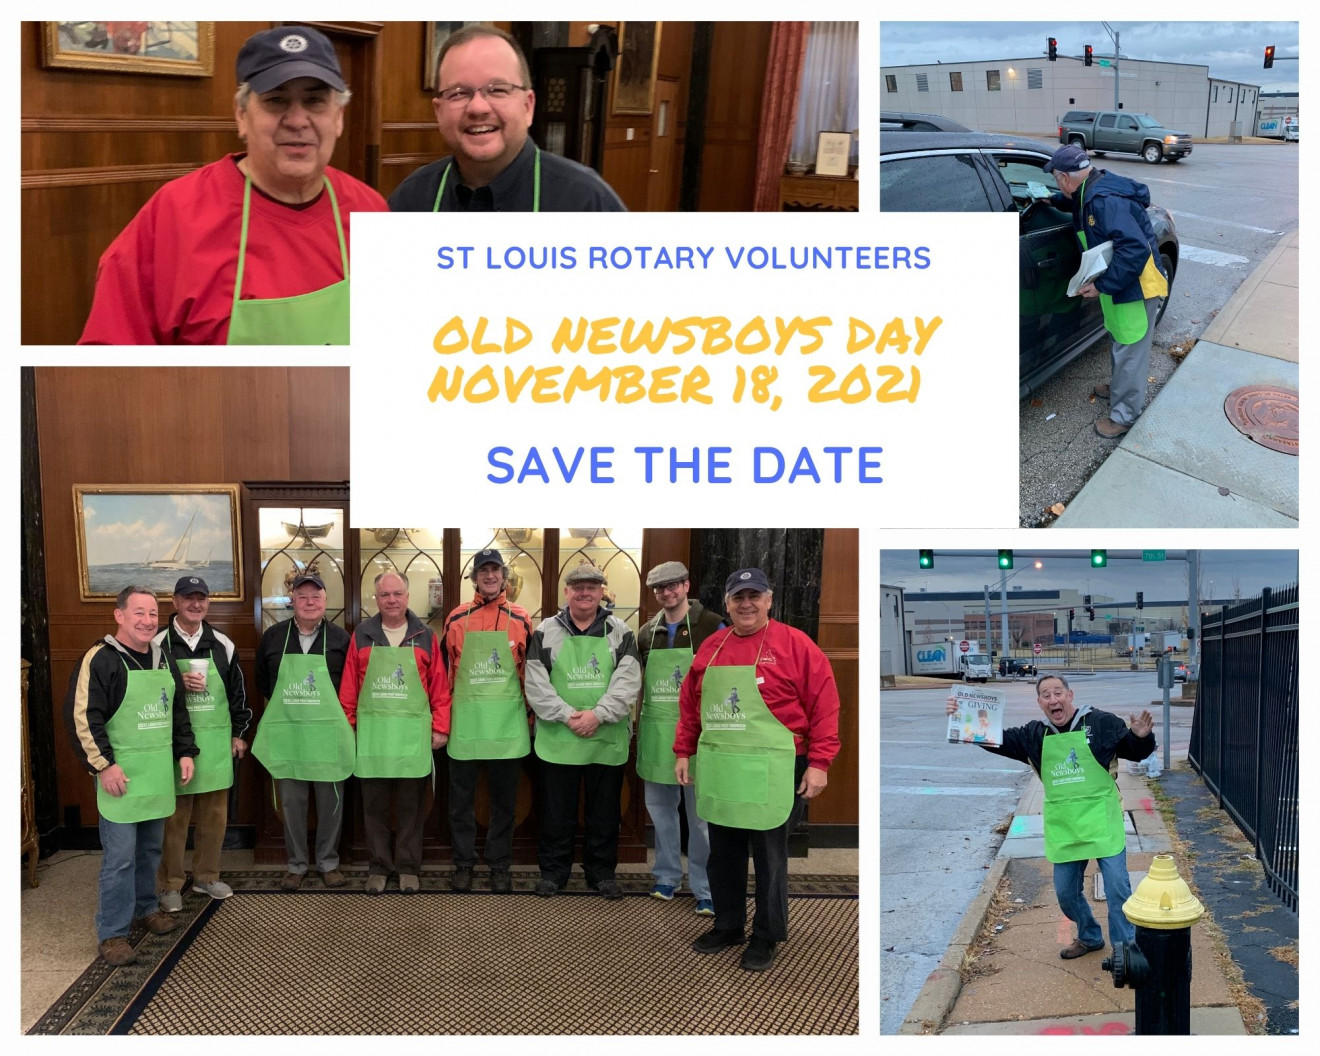 save the date for old newsboys day | november 18, 2021